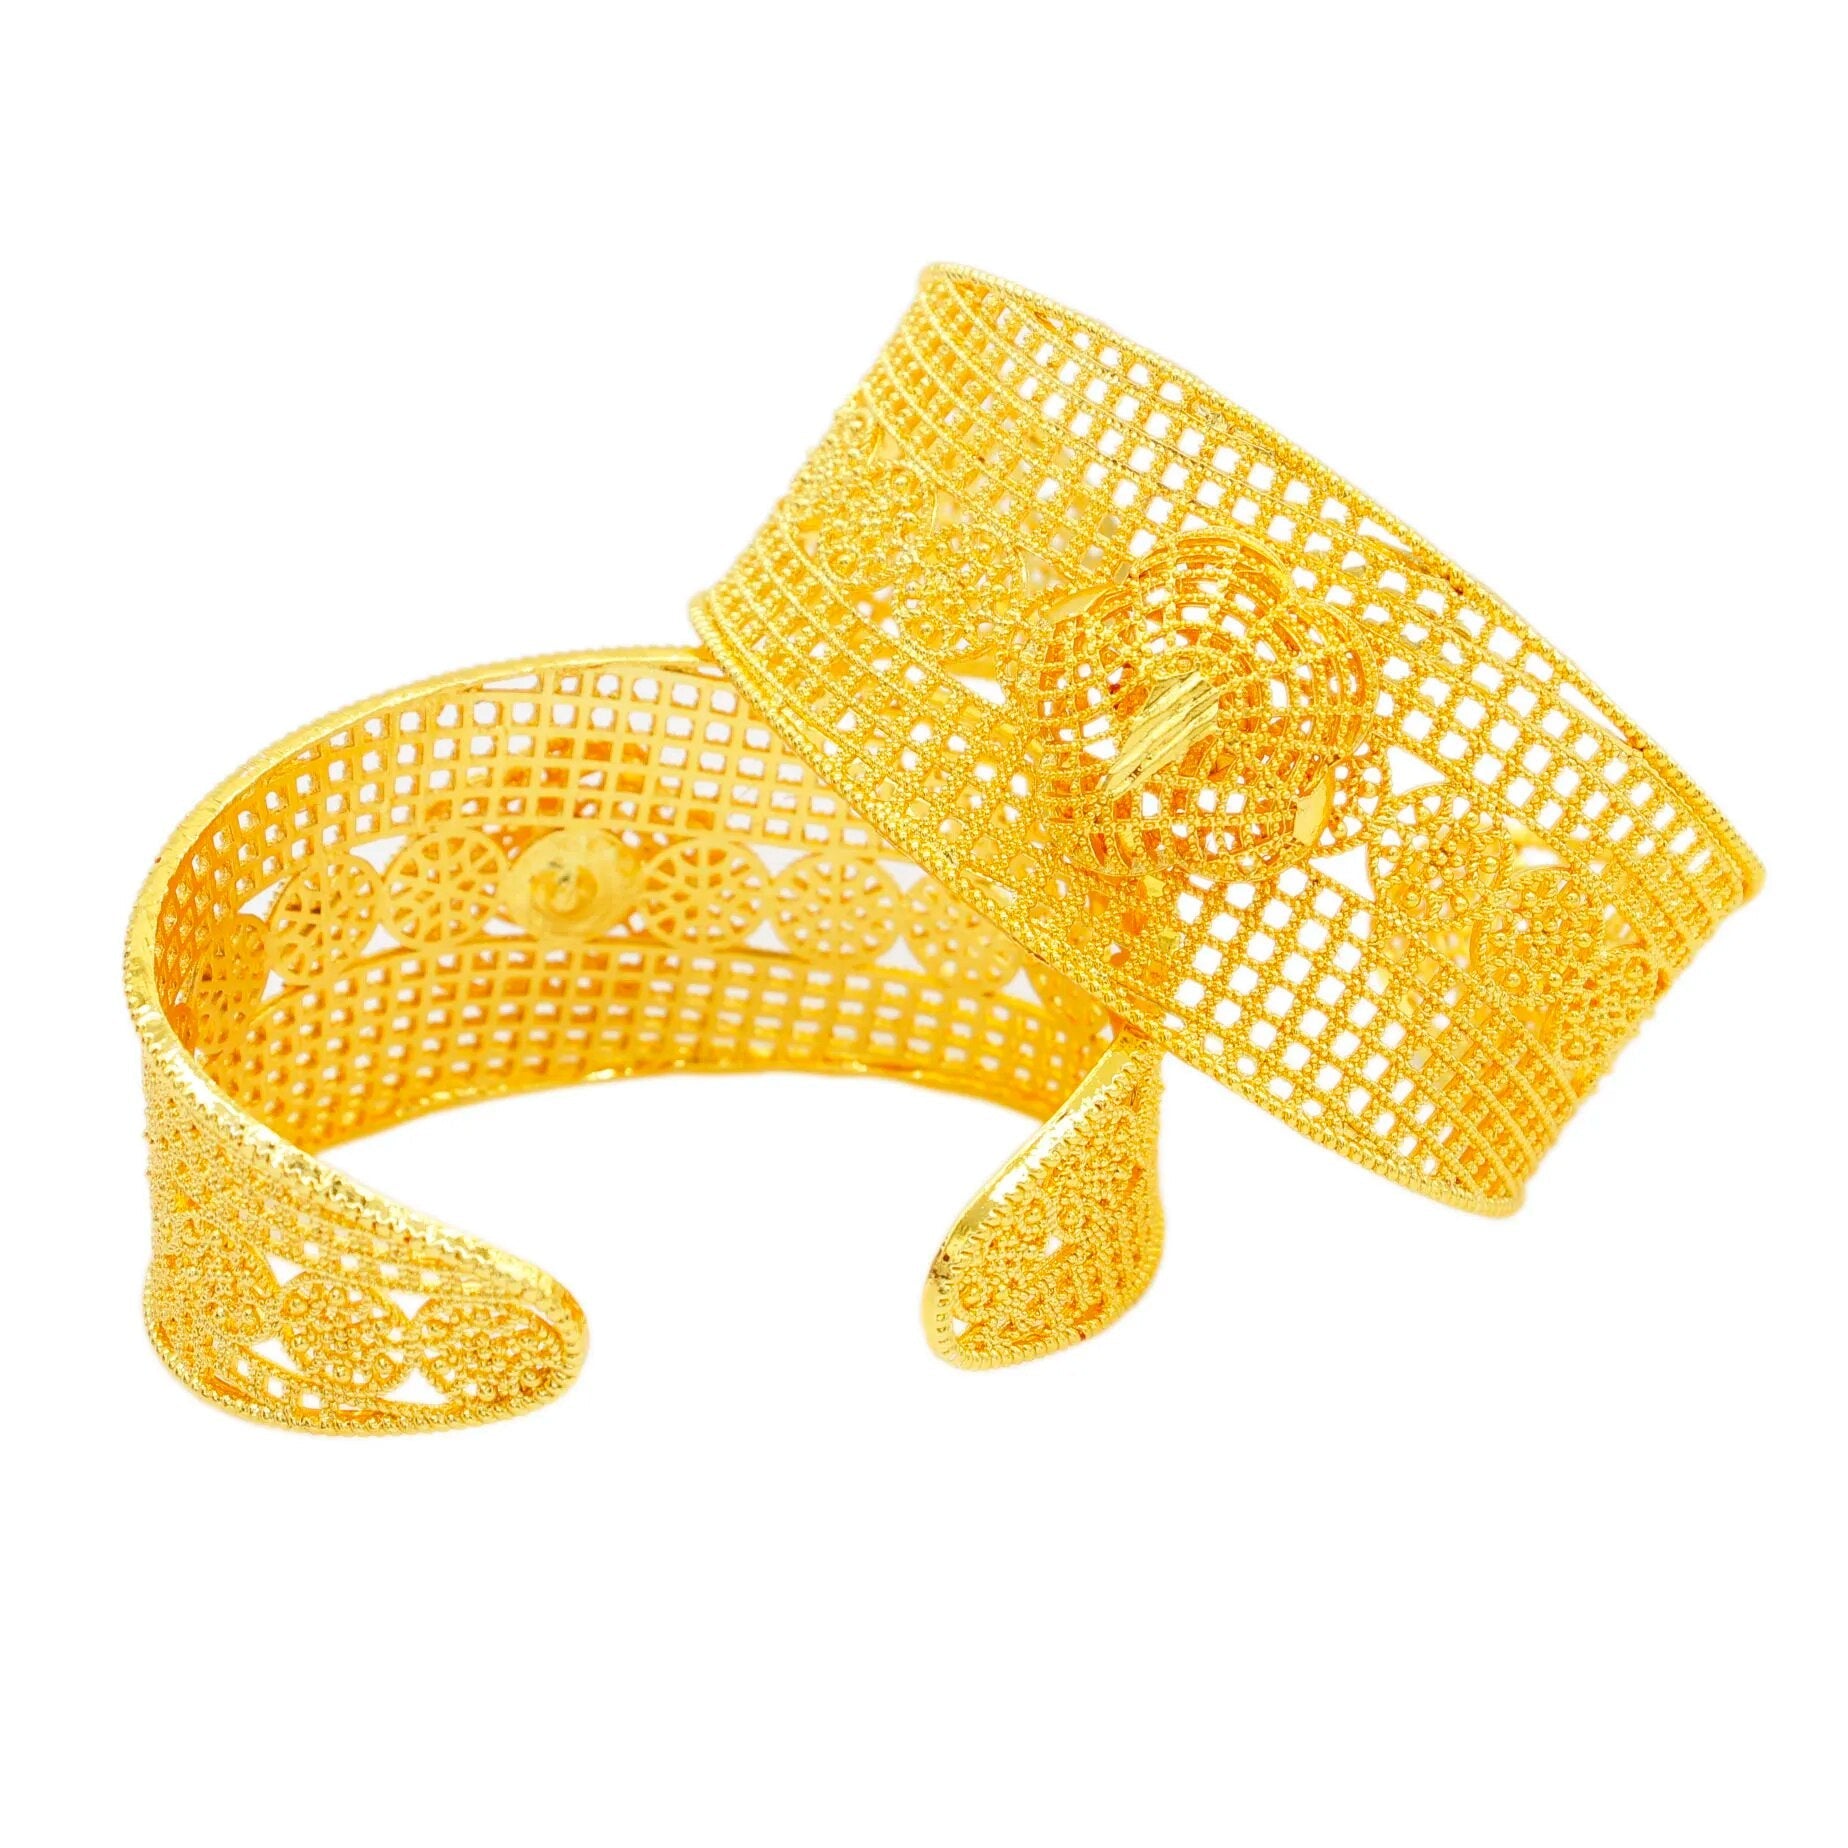 Cuff Bracelets for Women Girls Bangle Jewelry African Gold Color Bangle - Flexi Africa - Free Delivery www.flexiafrica.com